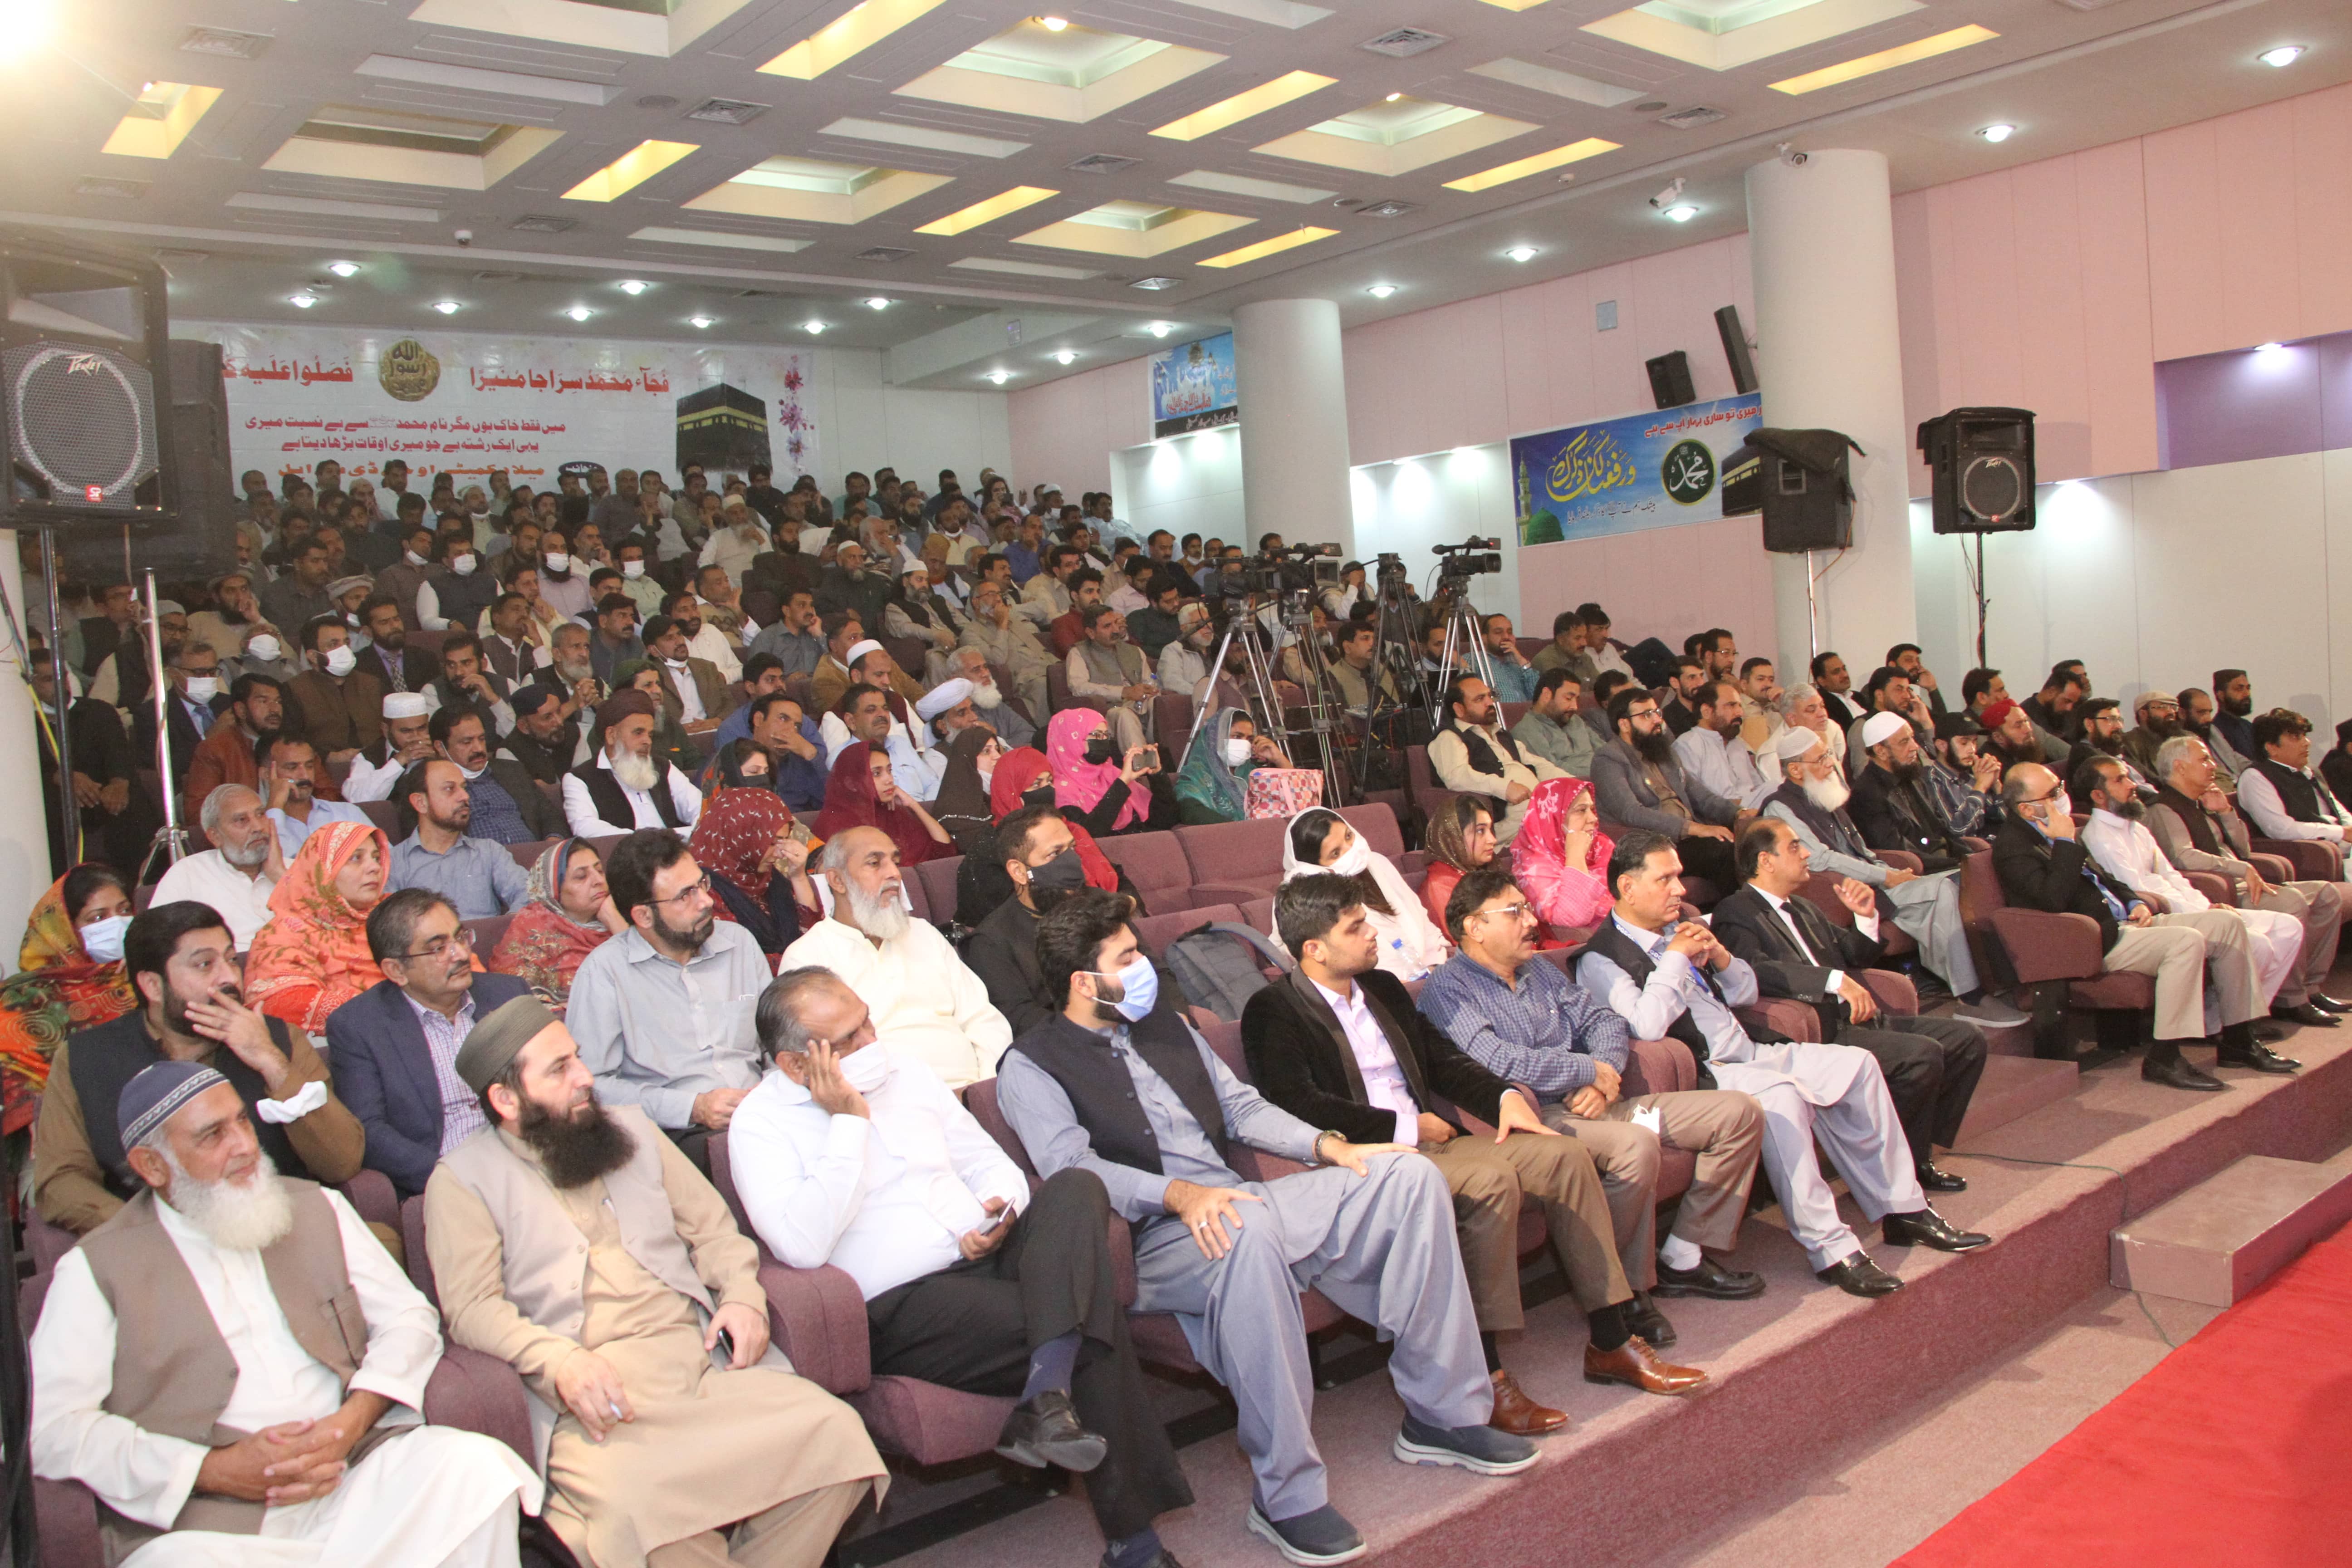 Baisat Rehmat-e-Alam SAW conference, O.g.d.c.l Islamabad - 5